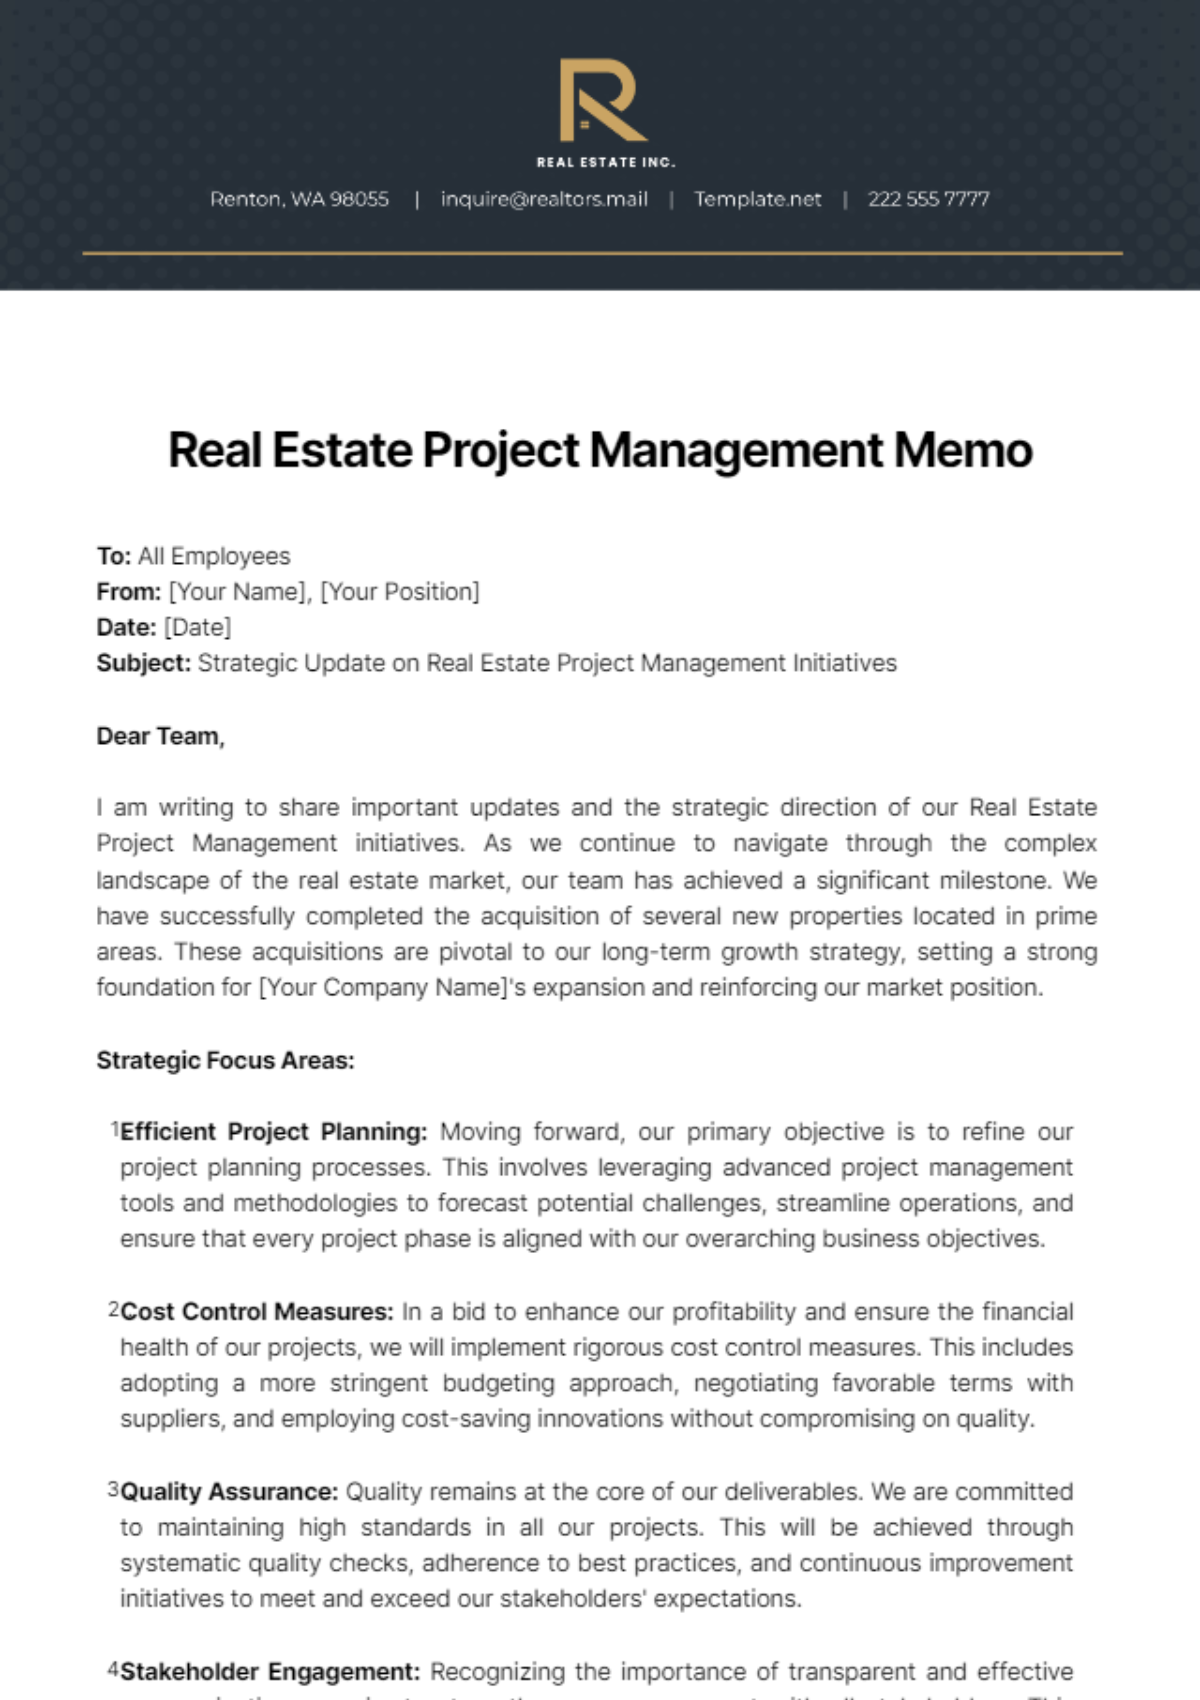 Real Estate Project Management Memo Template